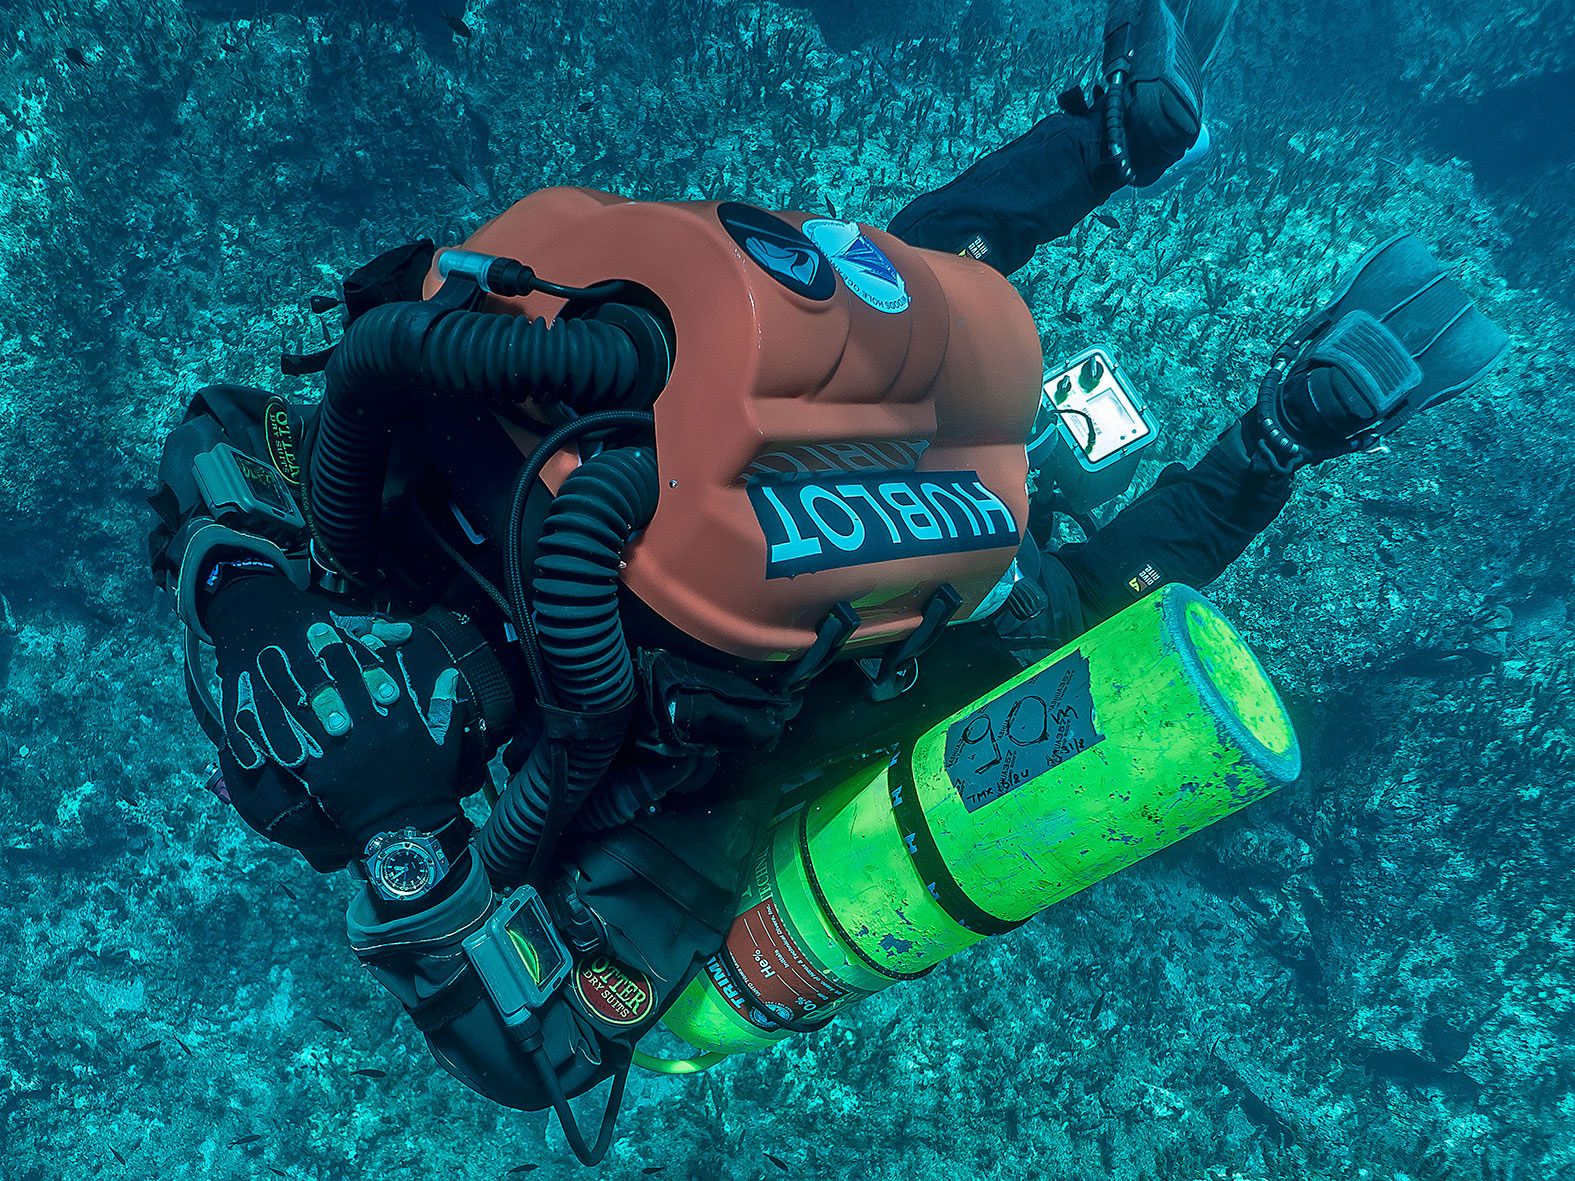 Alexander Sotiriou decompressing after his first dive on the wreck this season.